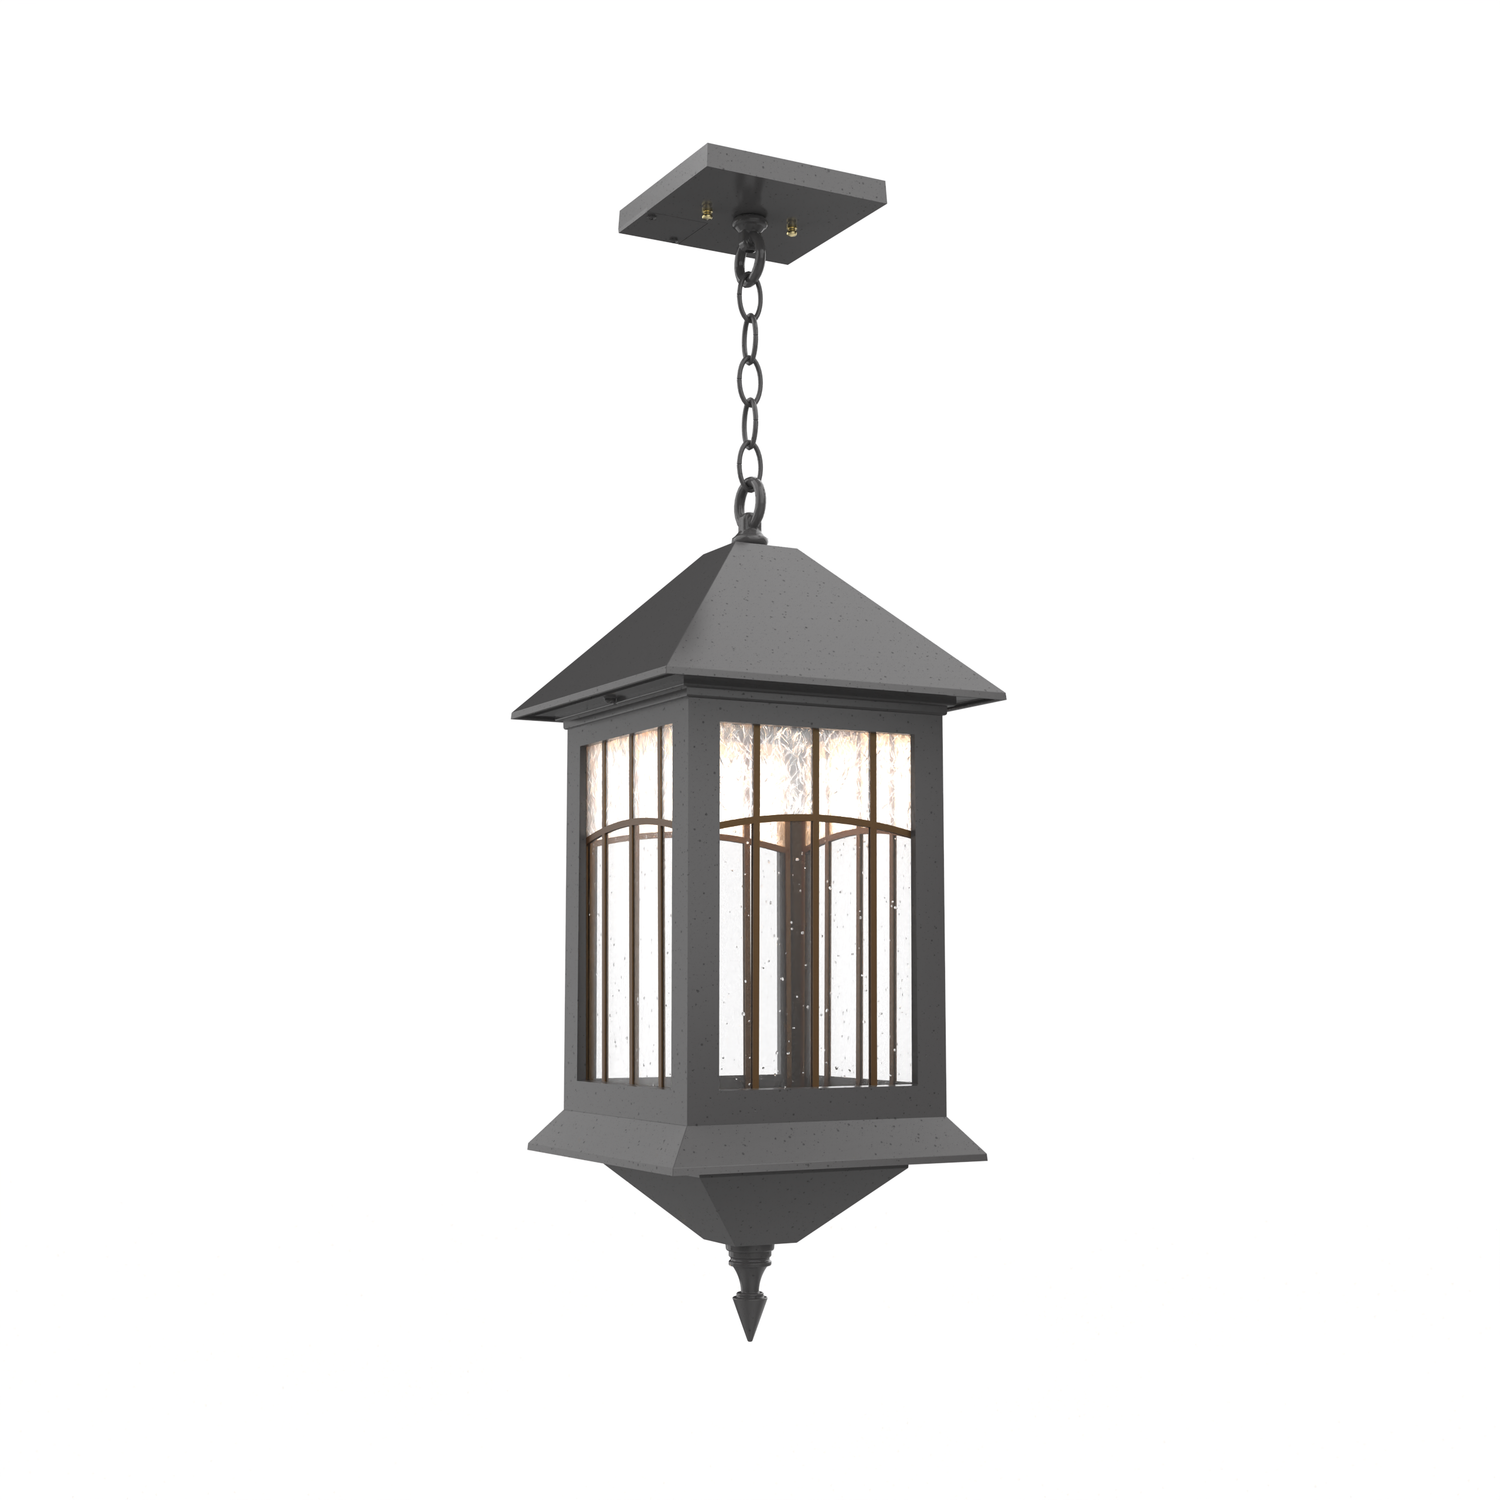 Havana - Ceiling mounting with chain closed bottom large format - 33855